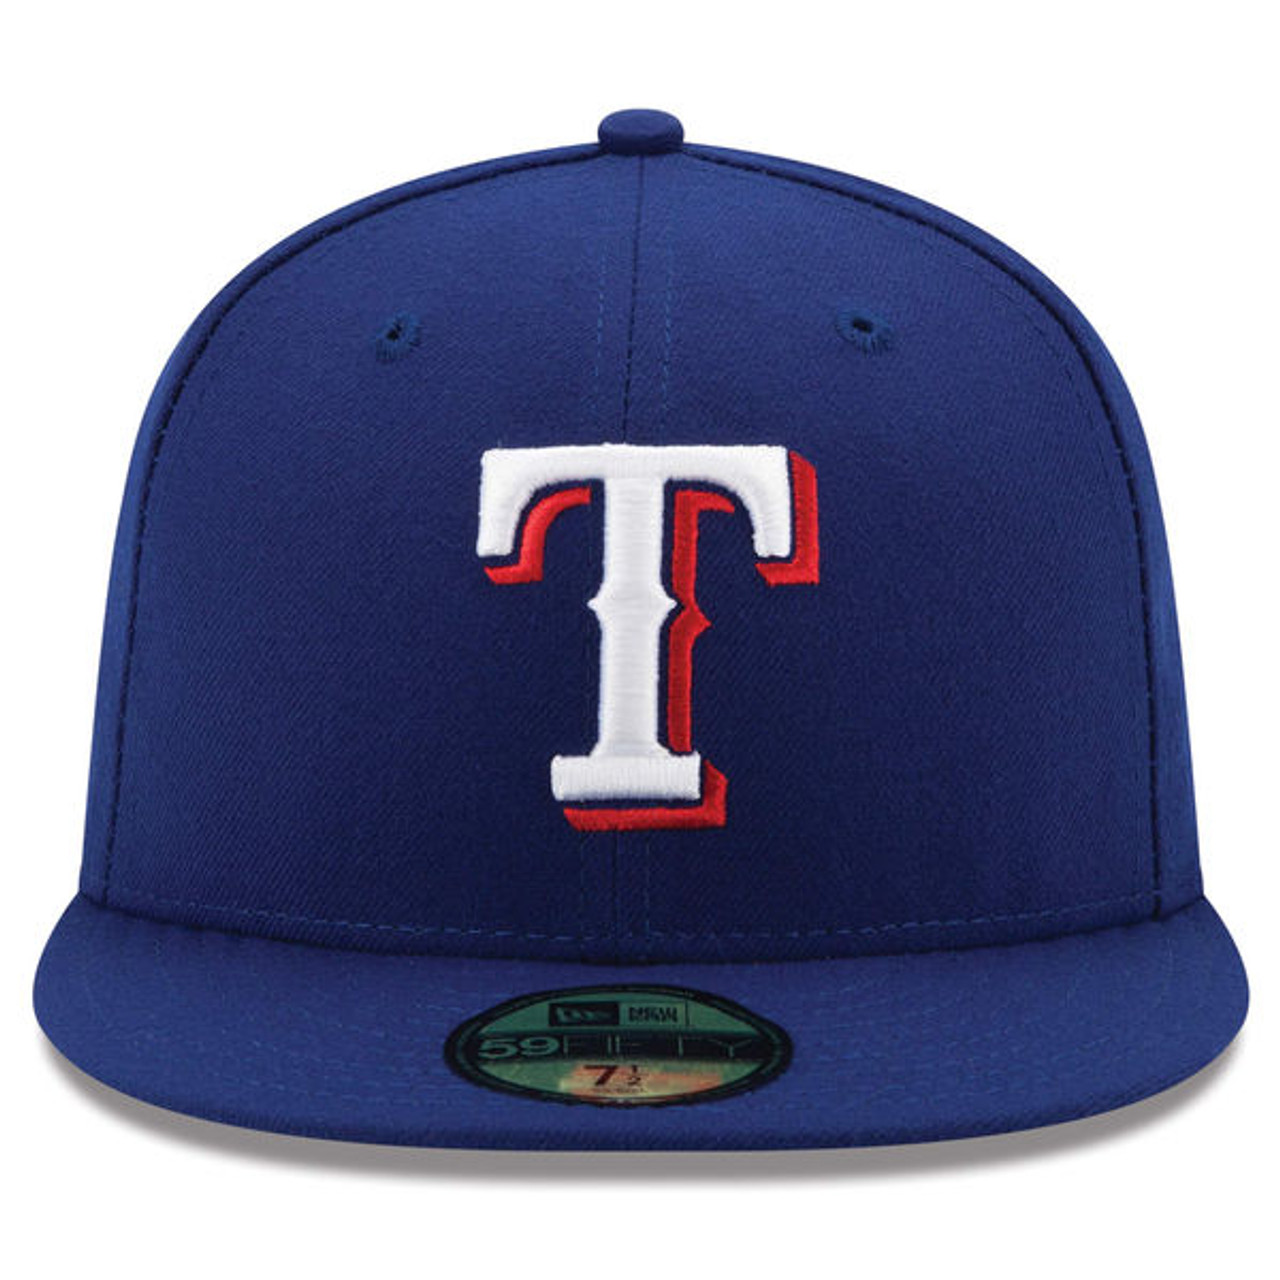 Men's New Era Stone/Navy Texas Rangers Retro 59FIFTY Fitted Hat